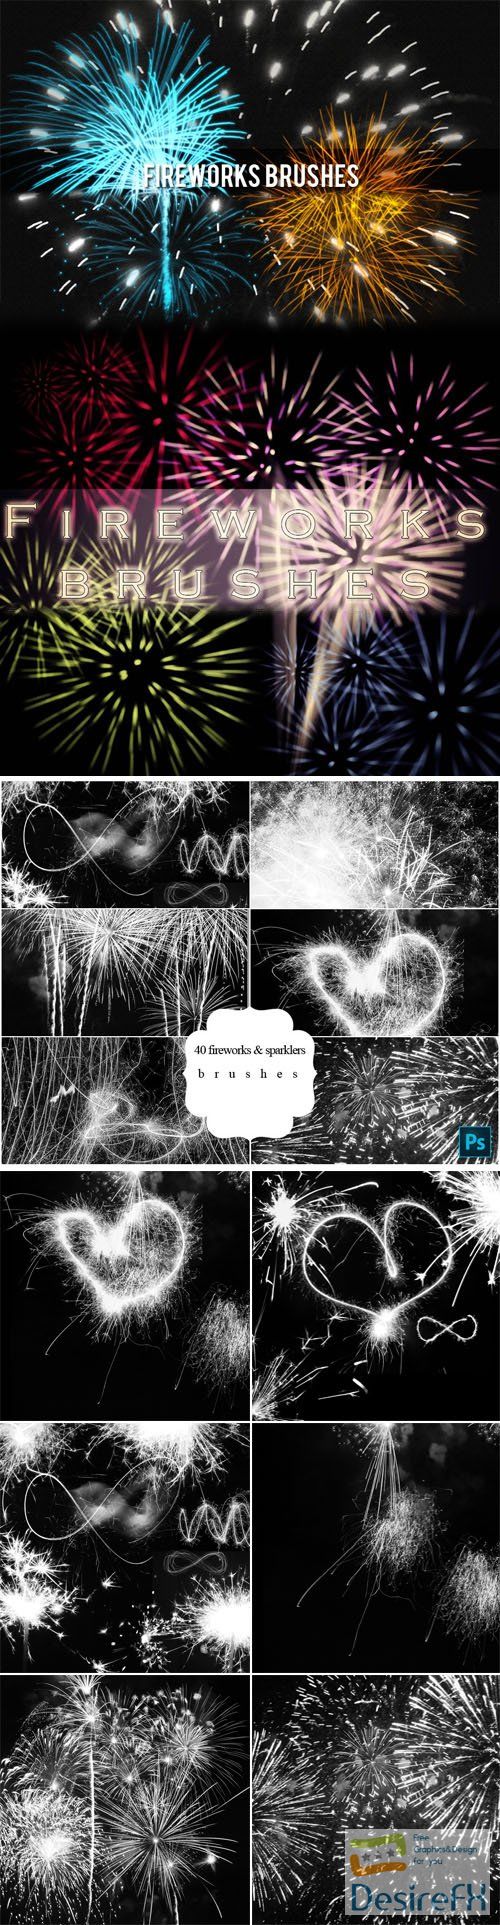 60+ Fireworks &amp; Sparklers Brushes Collection for Photoshop